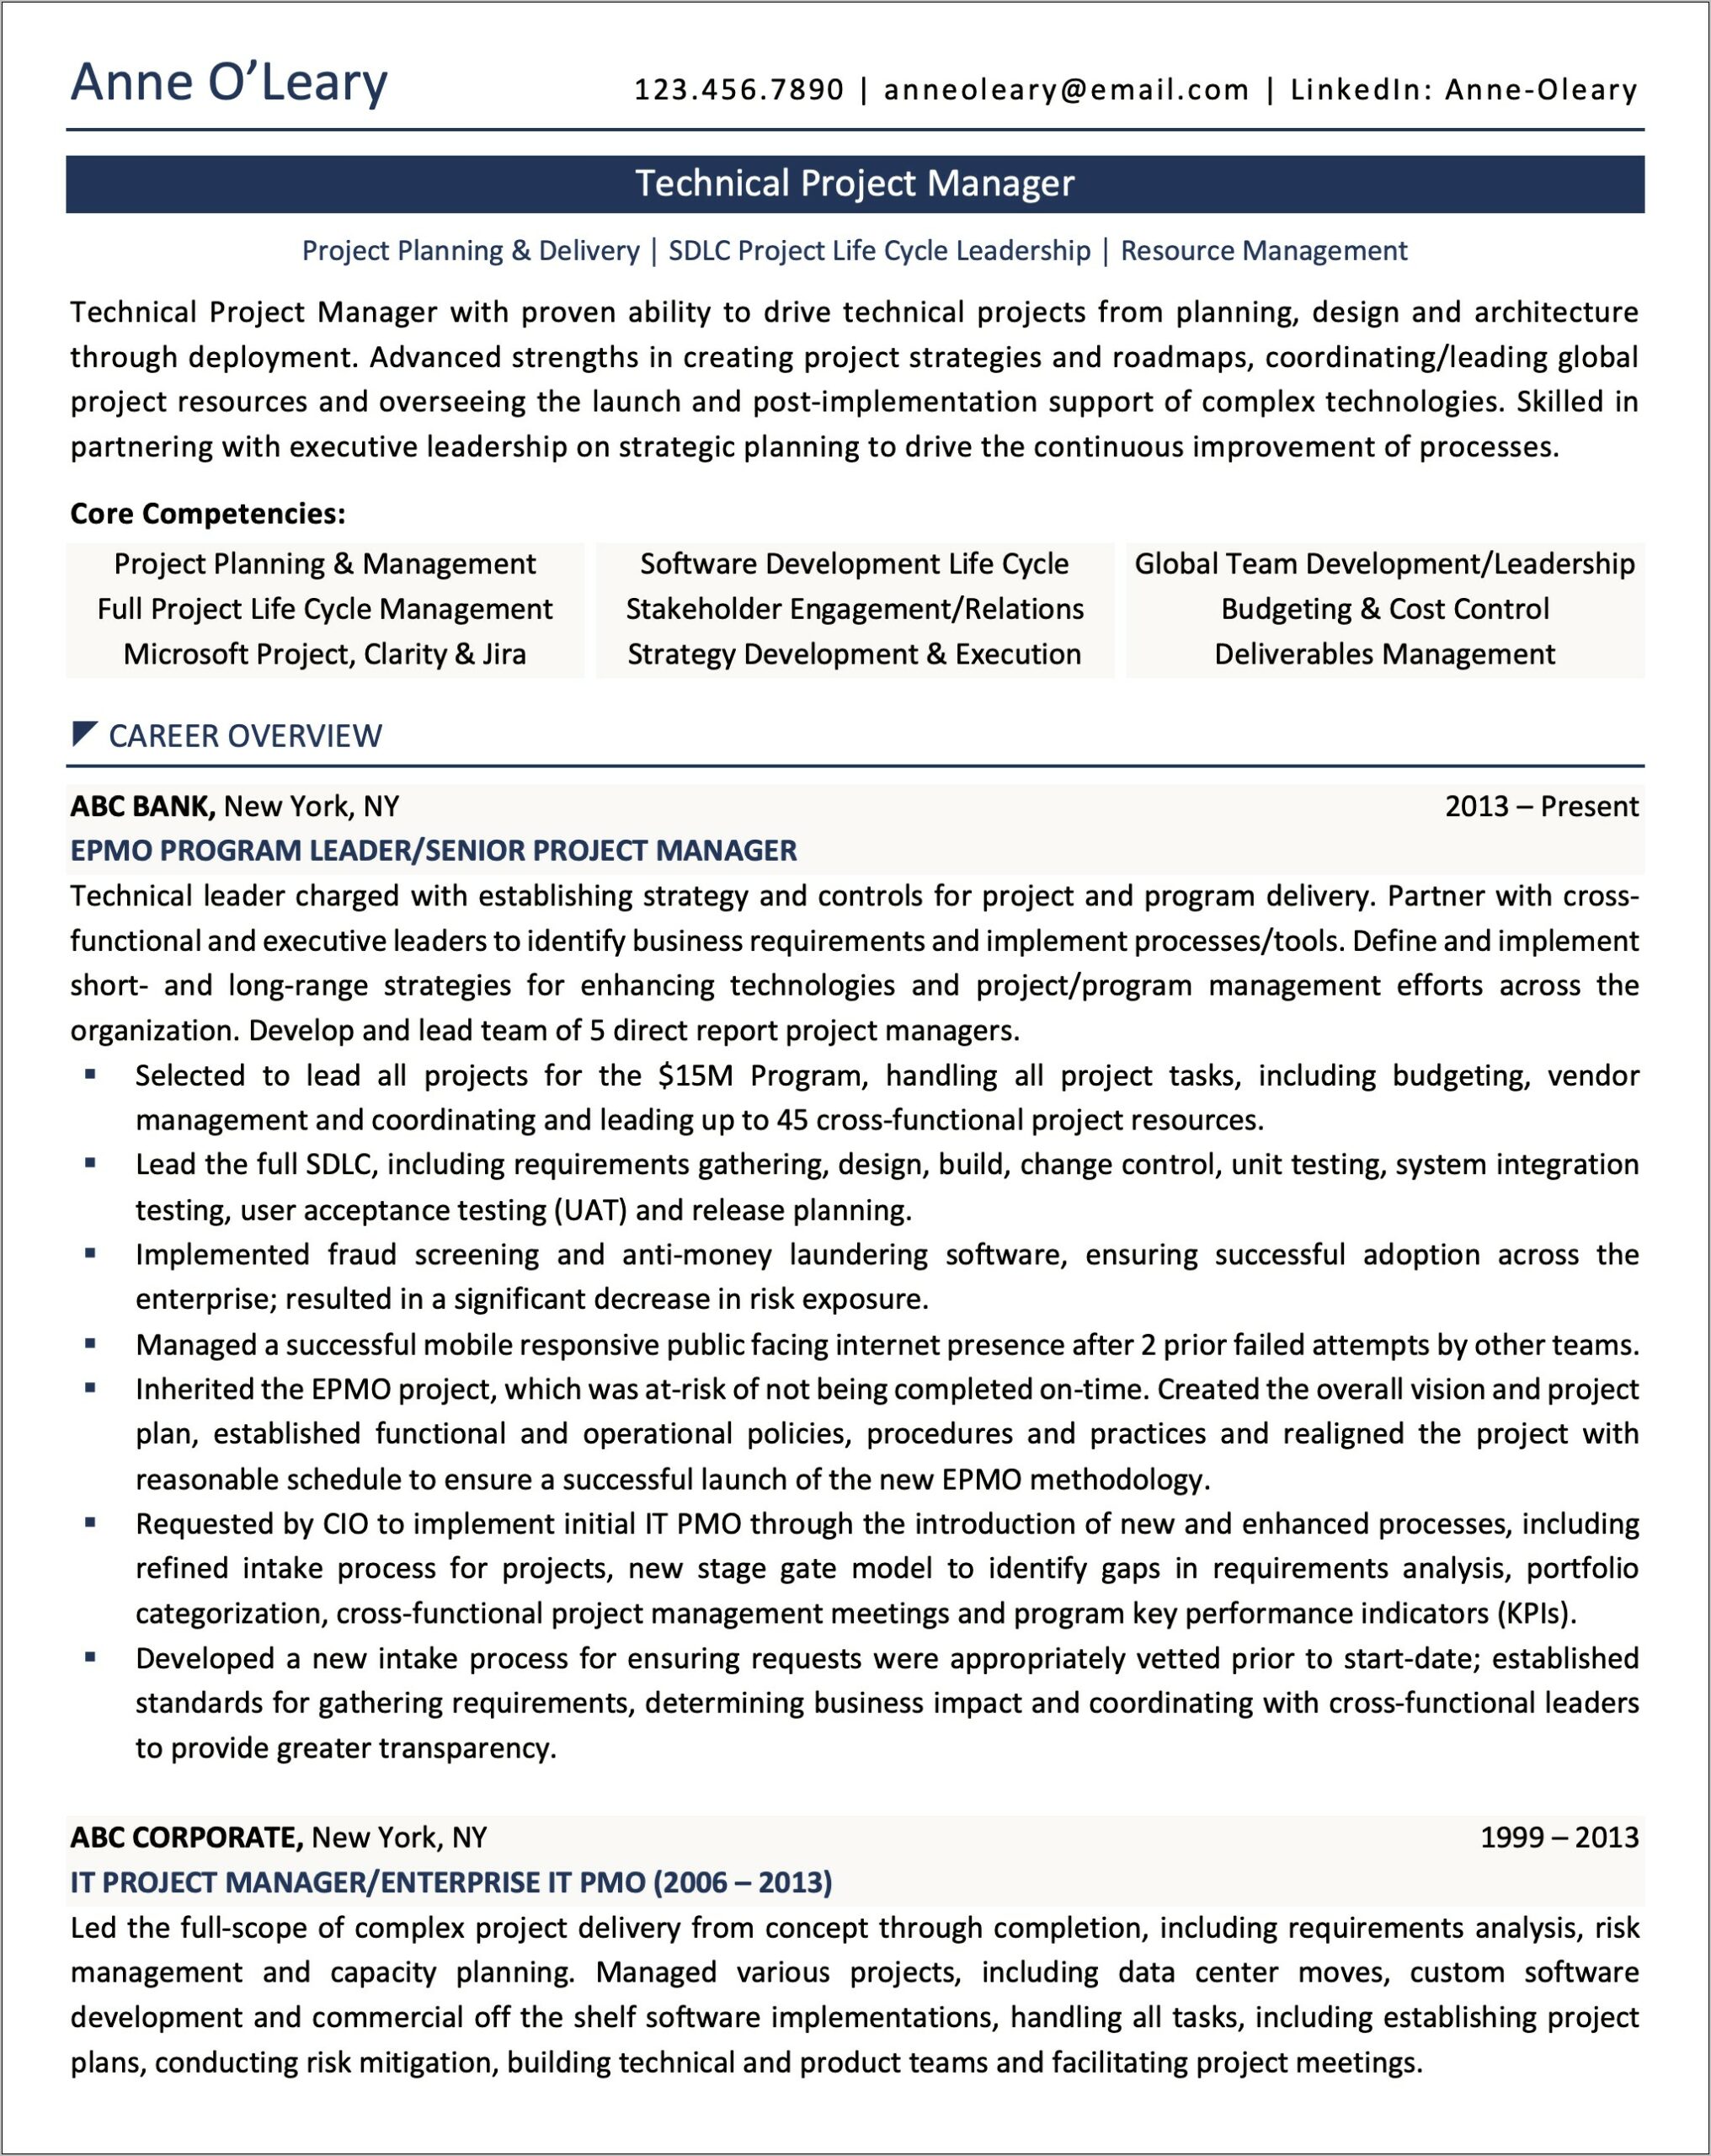 Professional Profile Resume Examples Program Manager